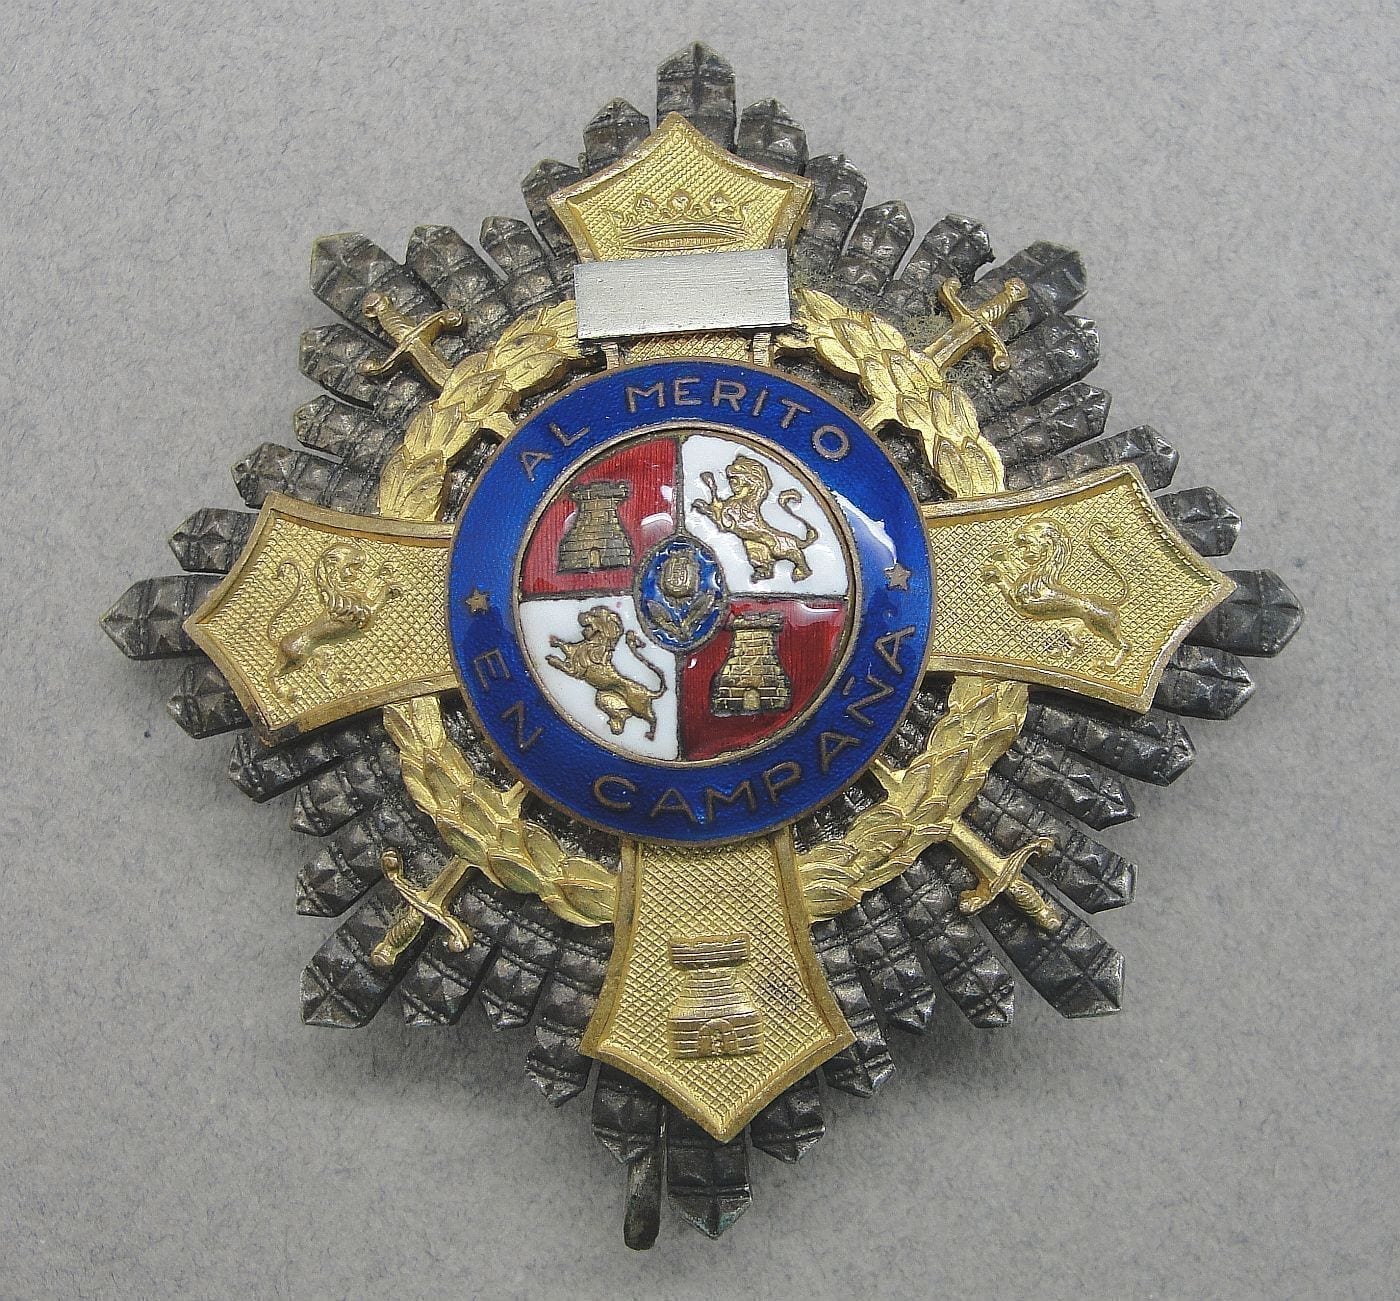 Spanish War Cross as Awarded to Members of the Condor Legion